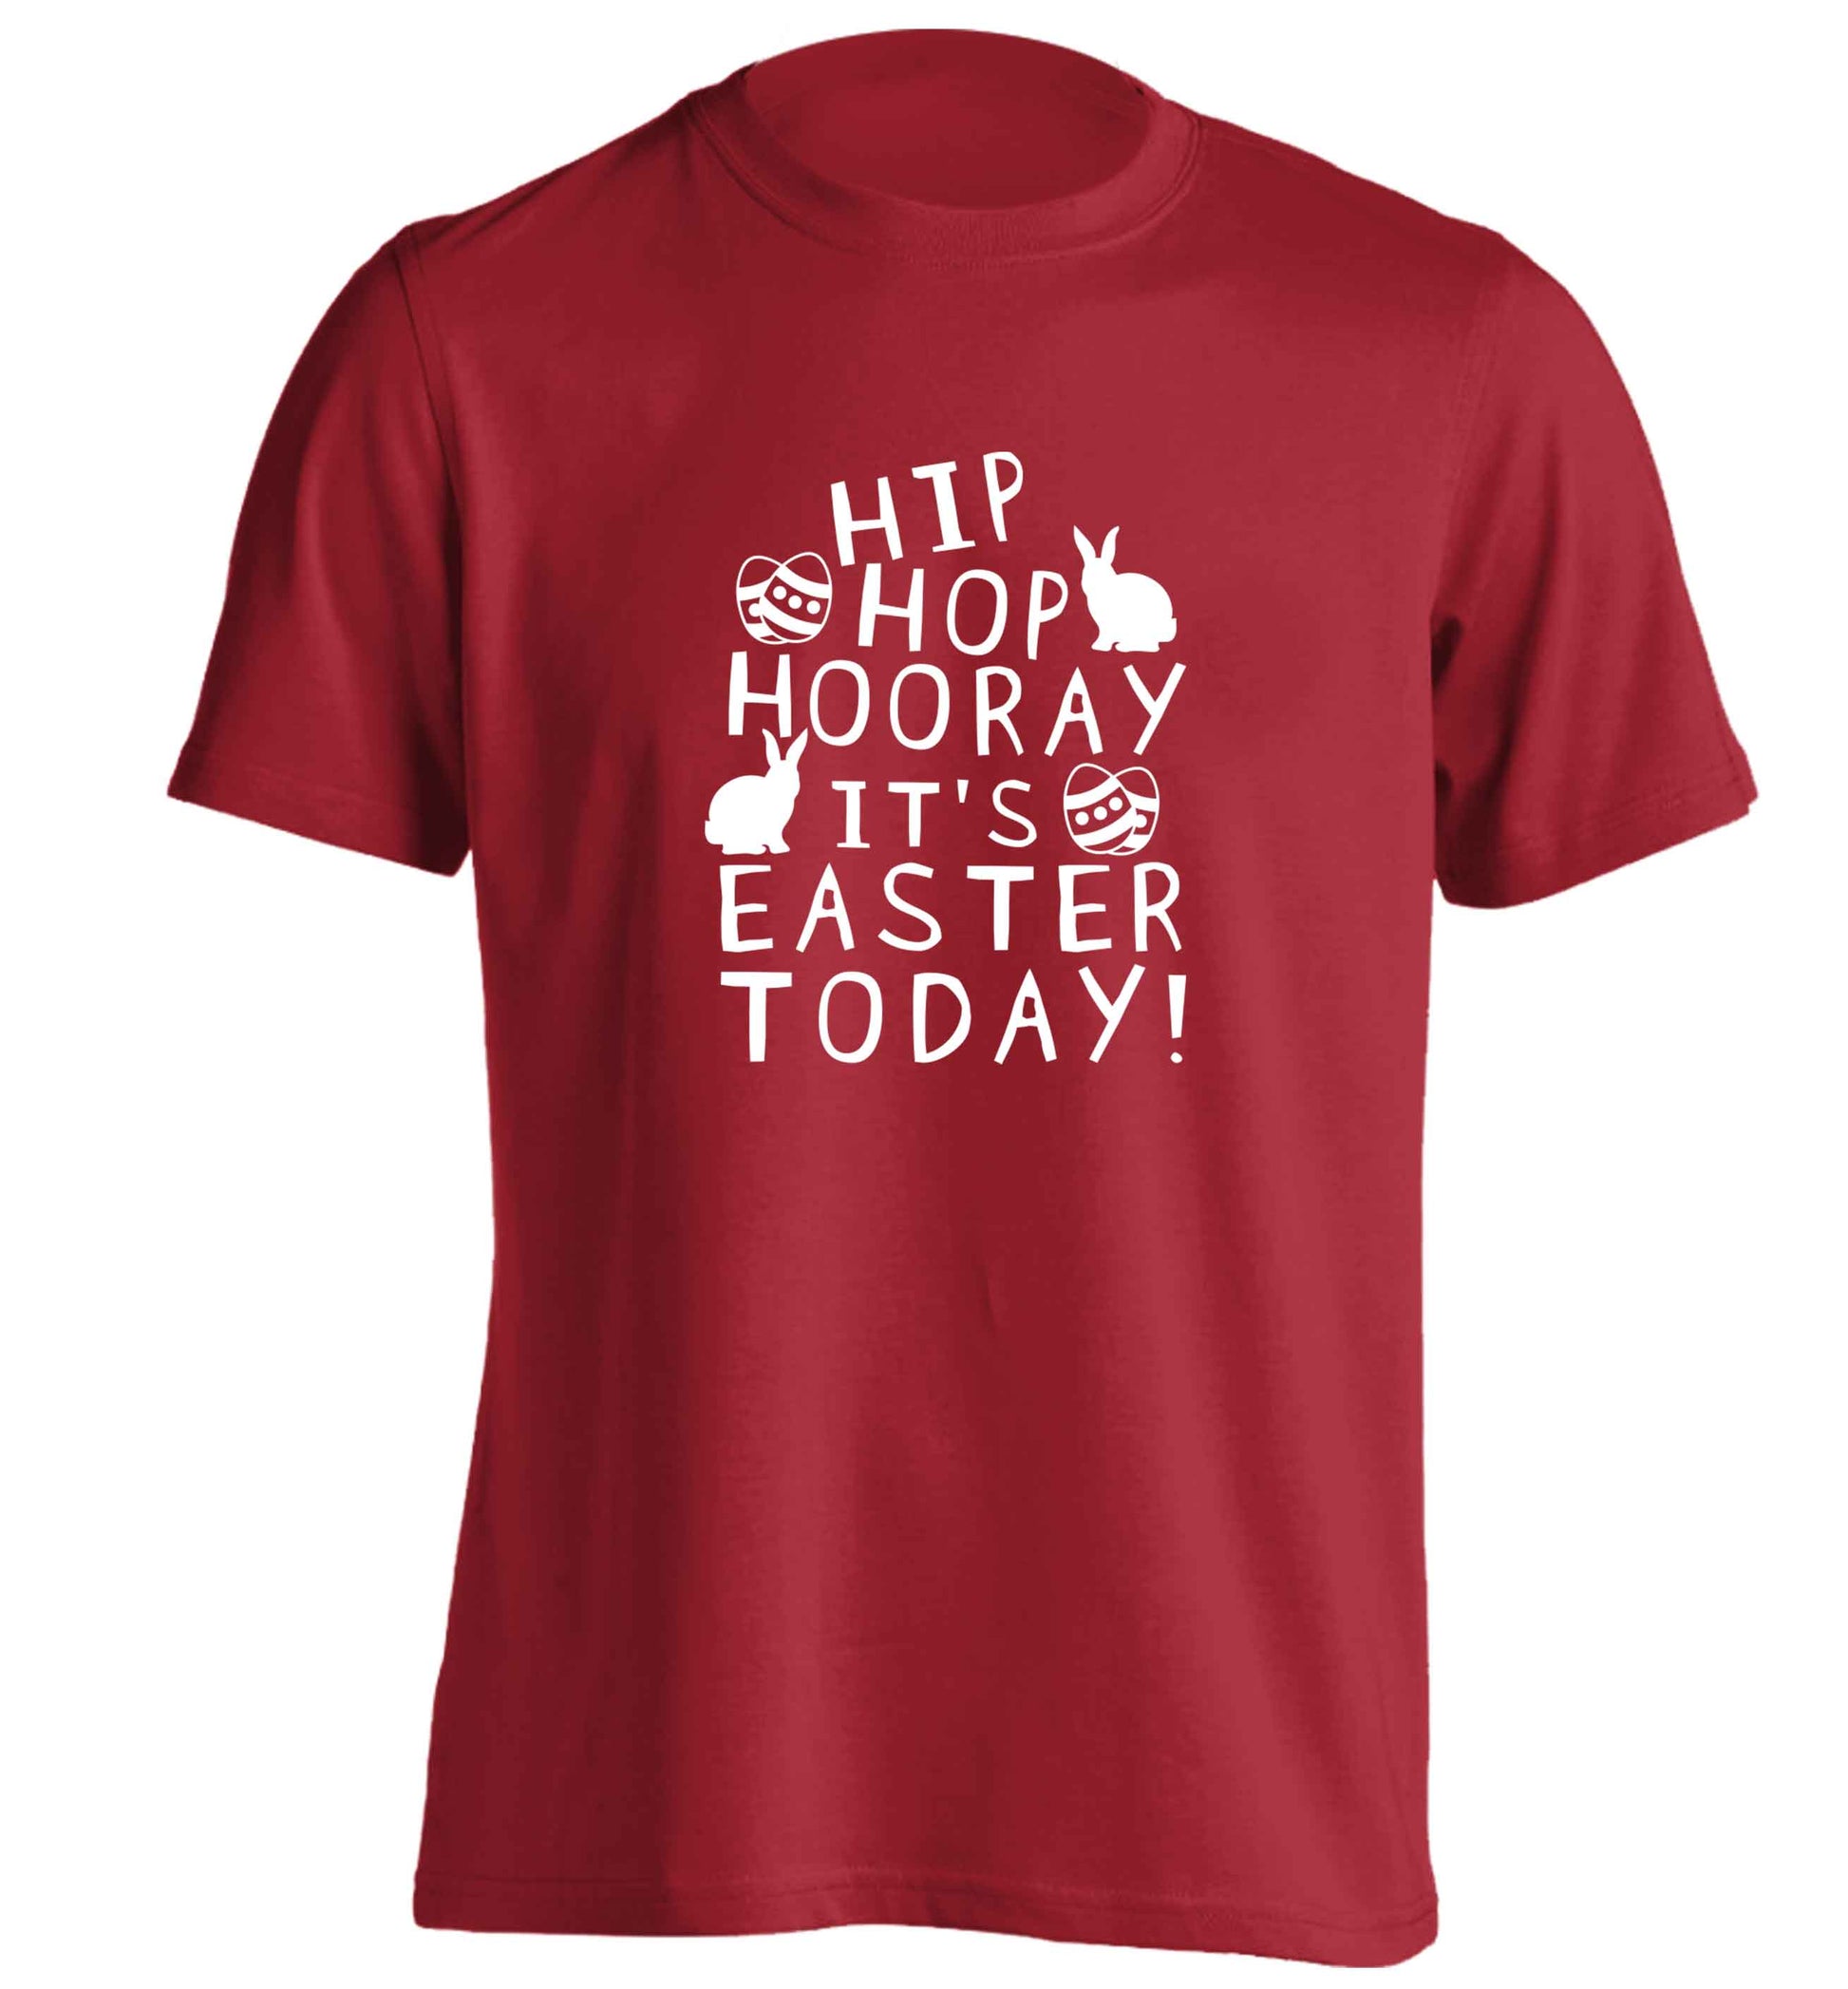 Hip hip hooray it's Easter today! adults unisex red Tshirt 2XL